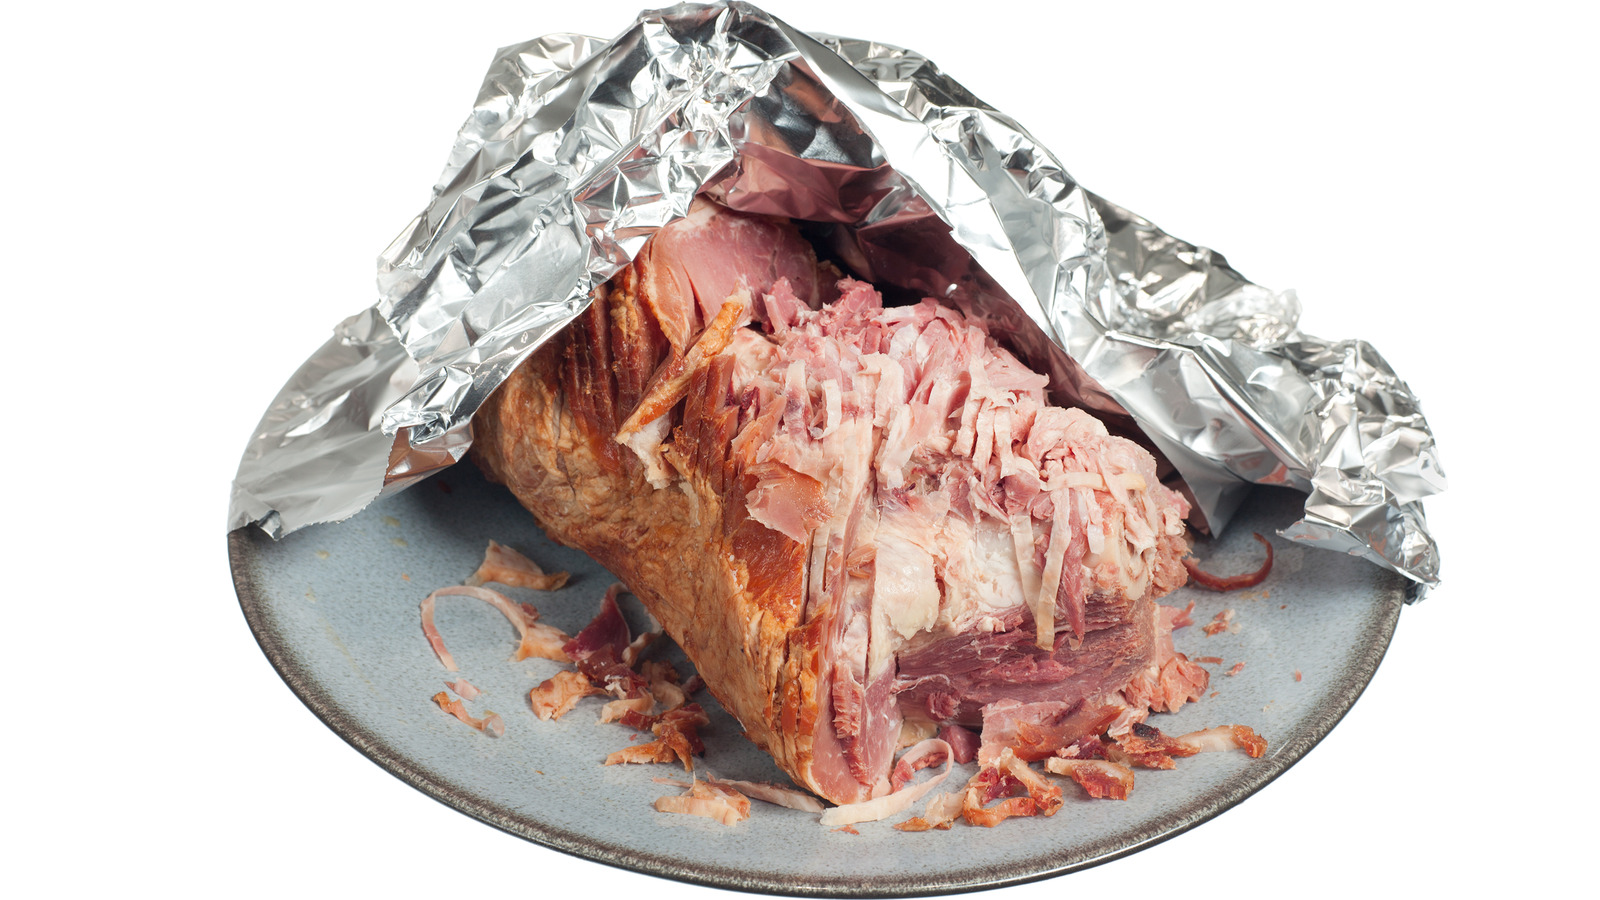 Why You Should Think Twice Before Wrapping Your Leftovers In Foil